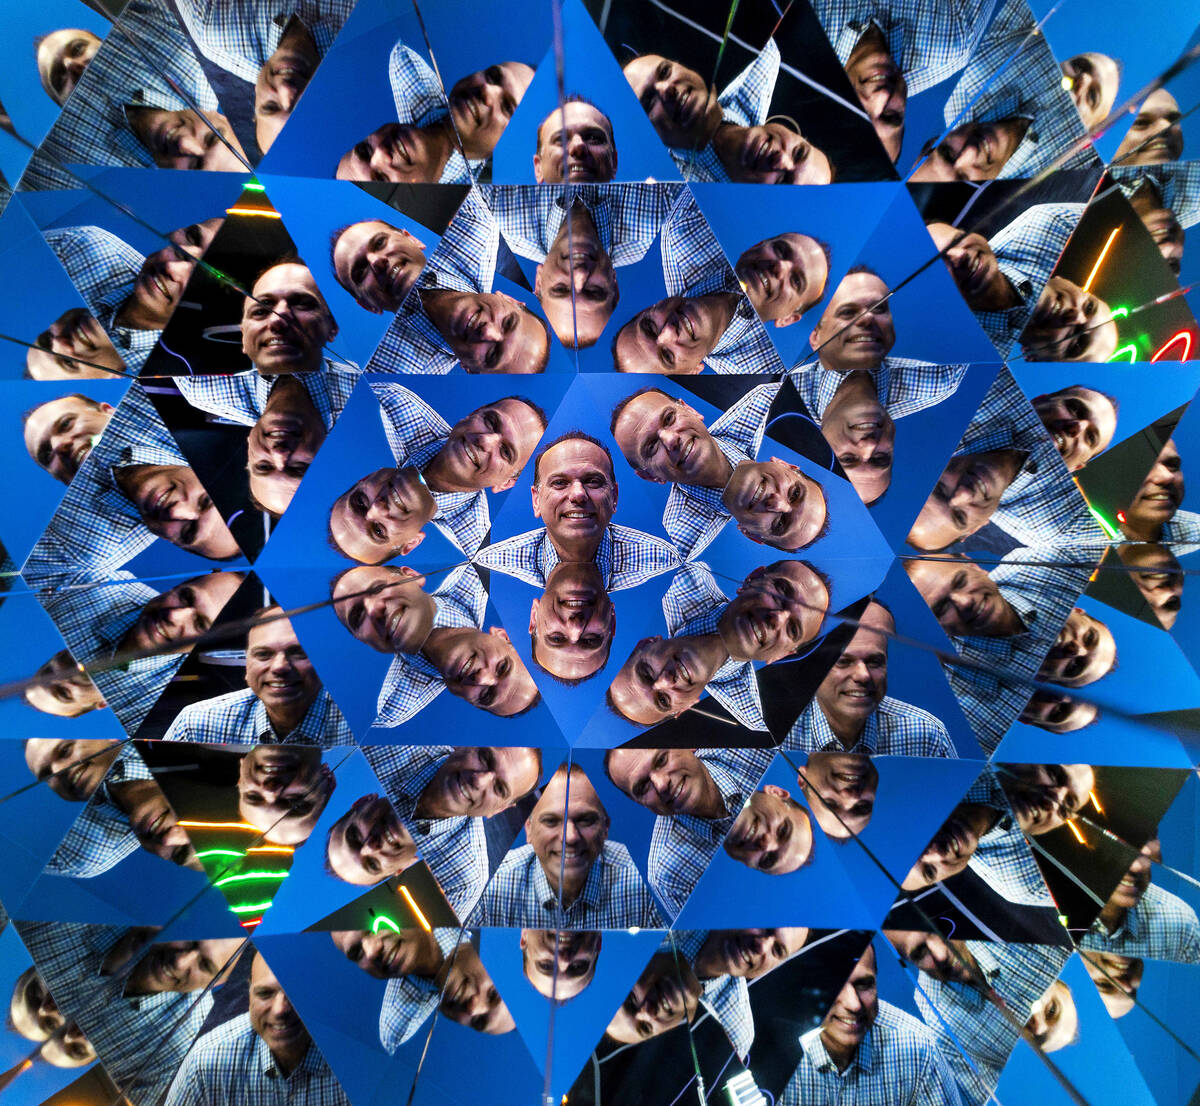 Sales and marketing manager Billy Pierro in a multitude of reflections within the Kaleidoscope ...